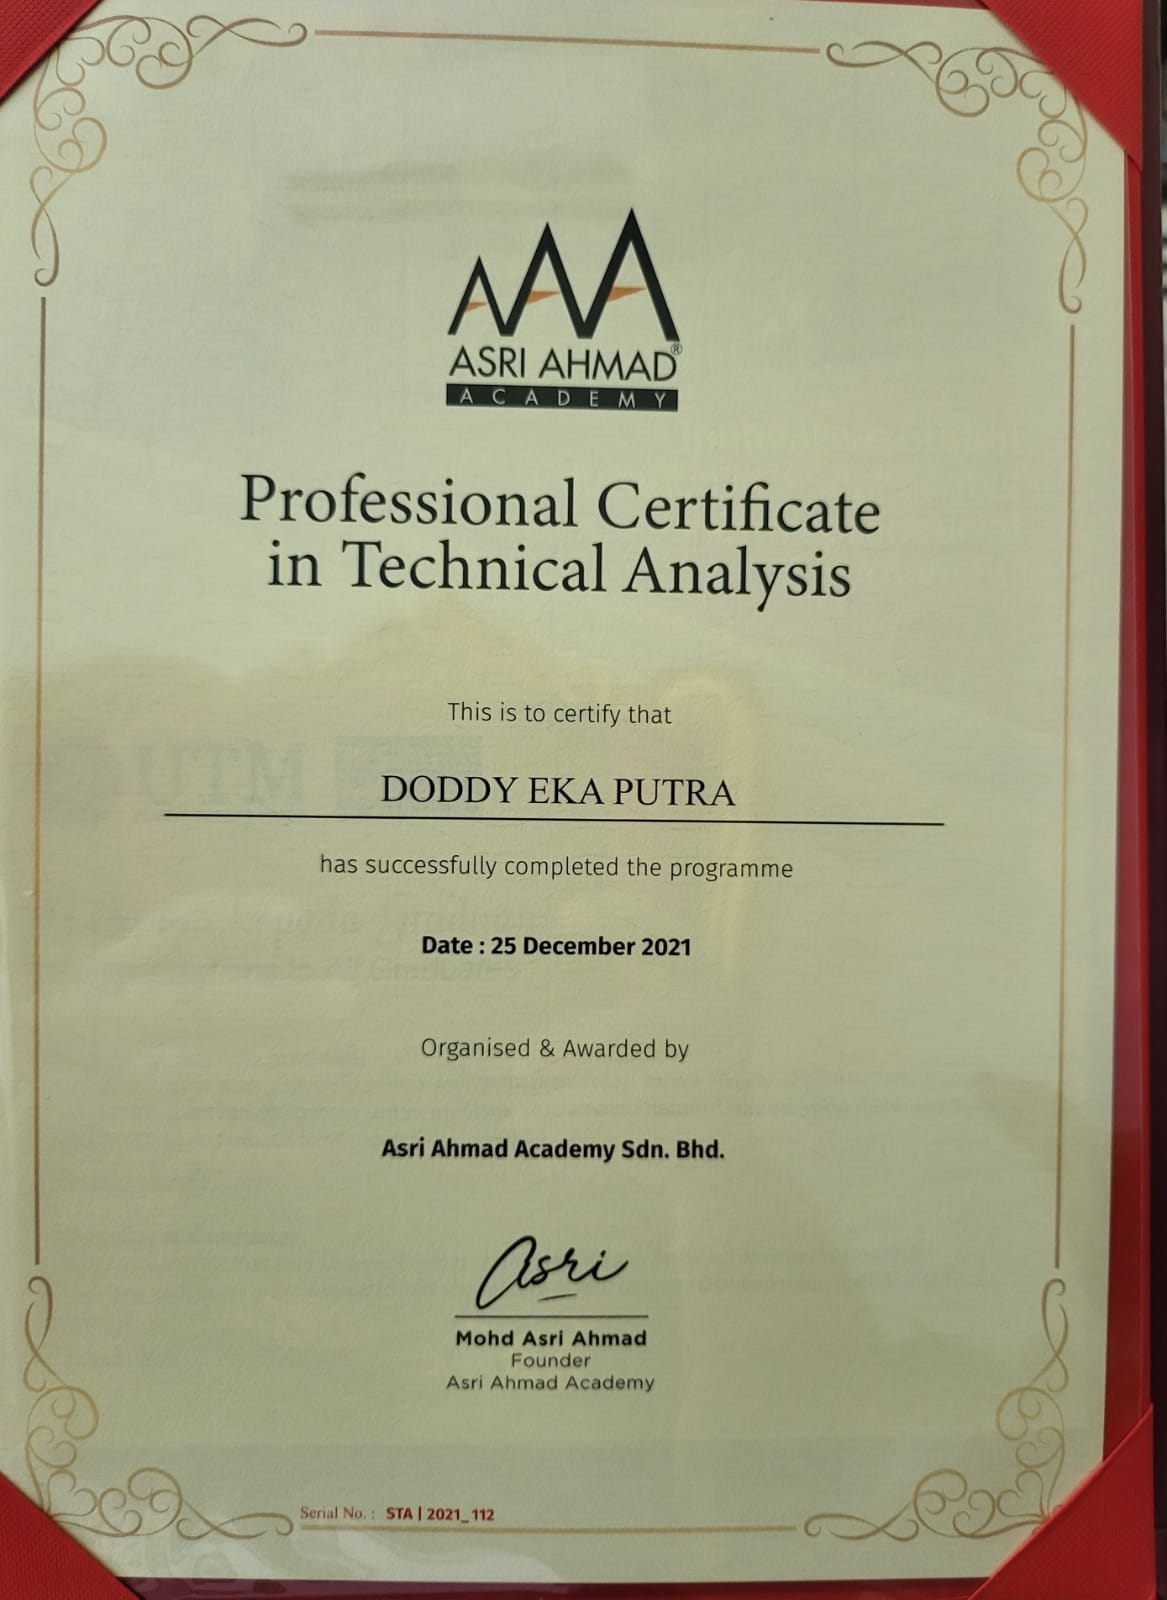 Professional Certificate in Technical Analysis